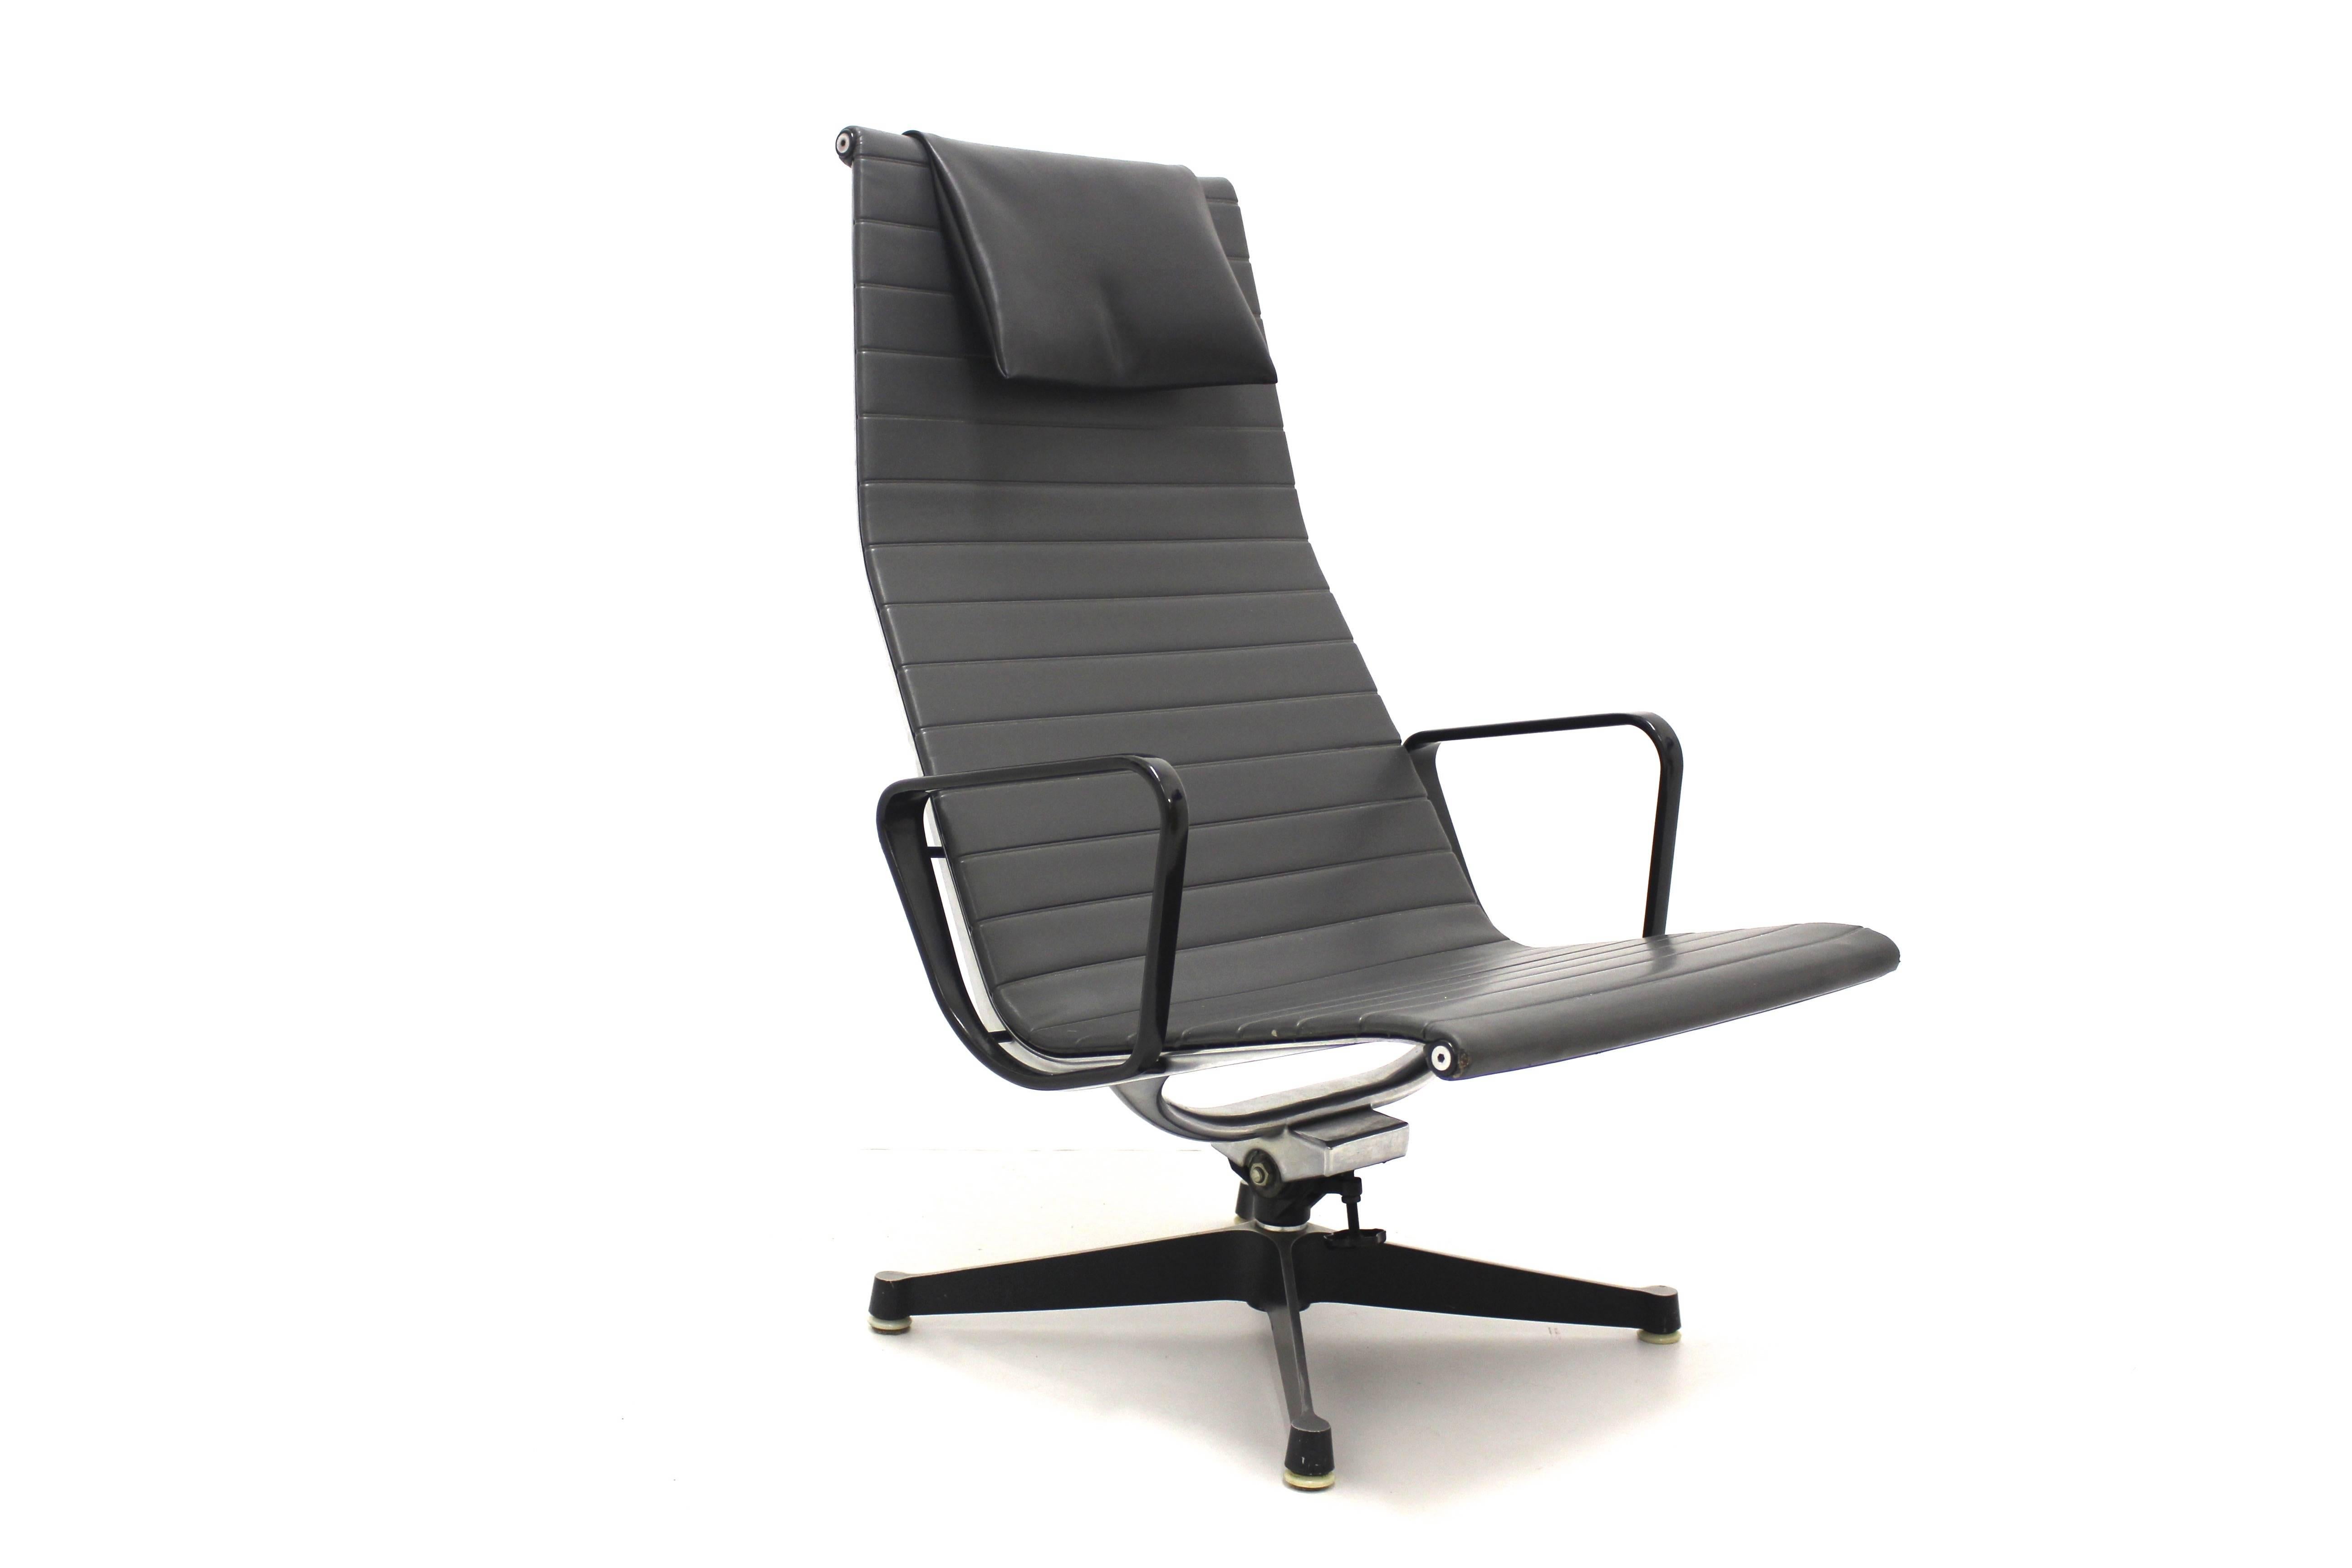 Mid Century Modern vintage office chair or desk chair EA 124 by Charles & Ray Eames, which features swiveling positions.
The chair rotates and show rocker function and swiveling positions with the back seat. It allows to swing softly.
The frame is